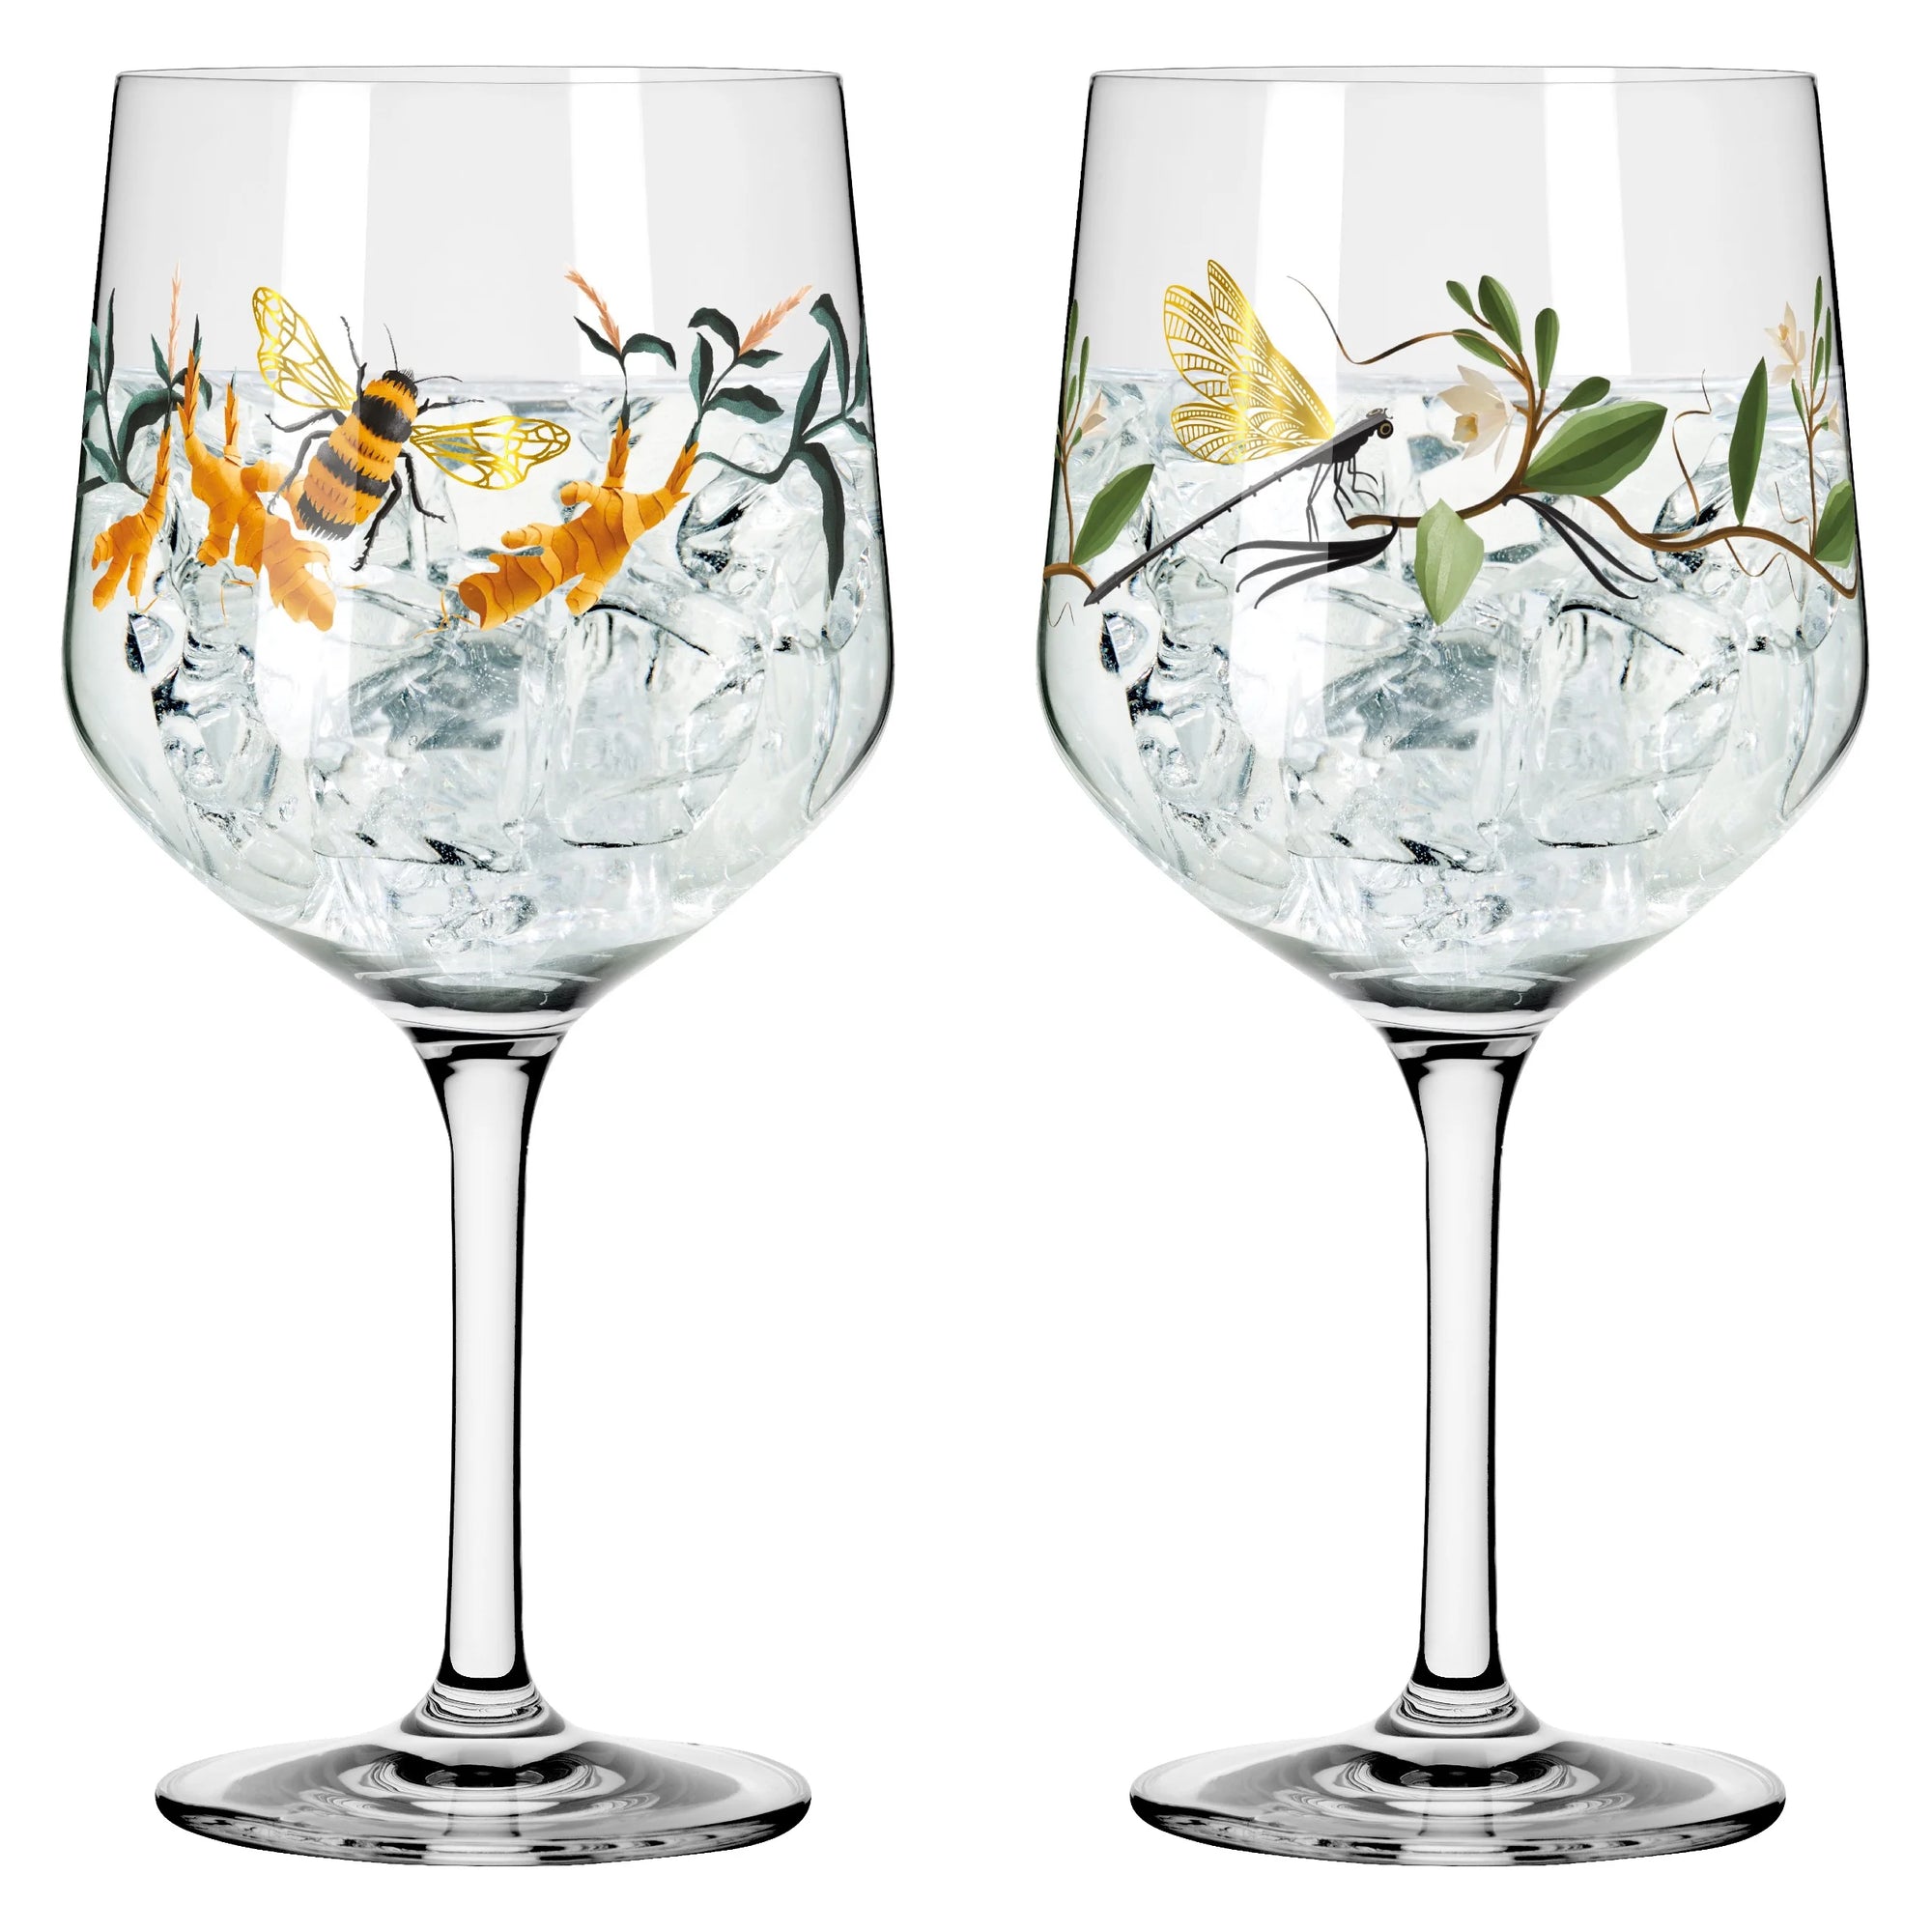 Exclusive Botanic Glamour Gin Glasses designed by Heike Zuschke, 3791002, made by Ritzenhoff in Germany.